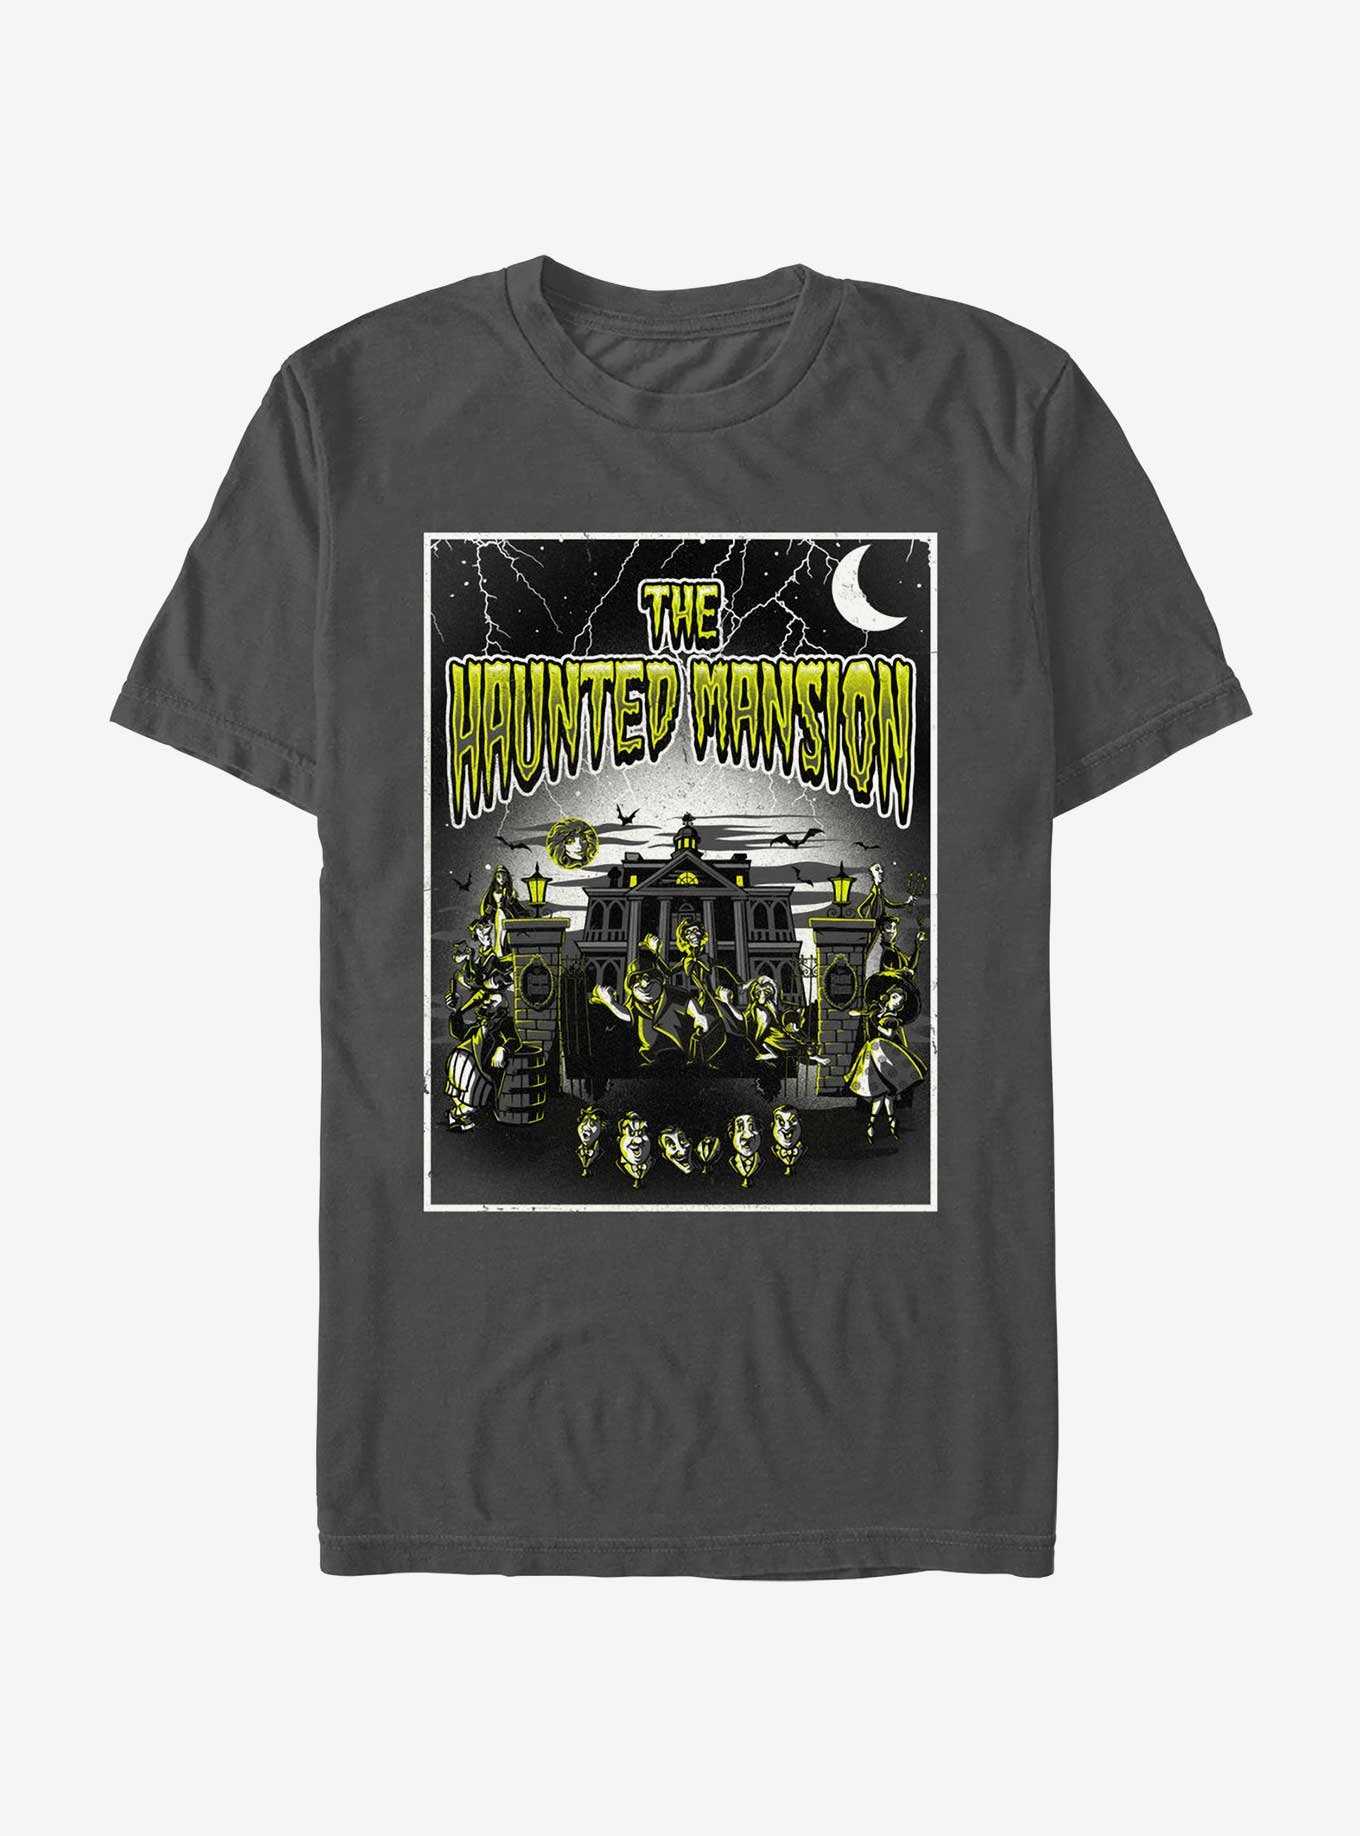 Disney Haunted Mansion Horror Mansion Poster T-Shirt BoxLunch Web Exclusive, , hi-res